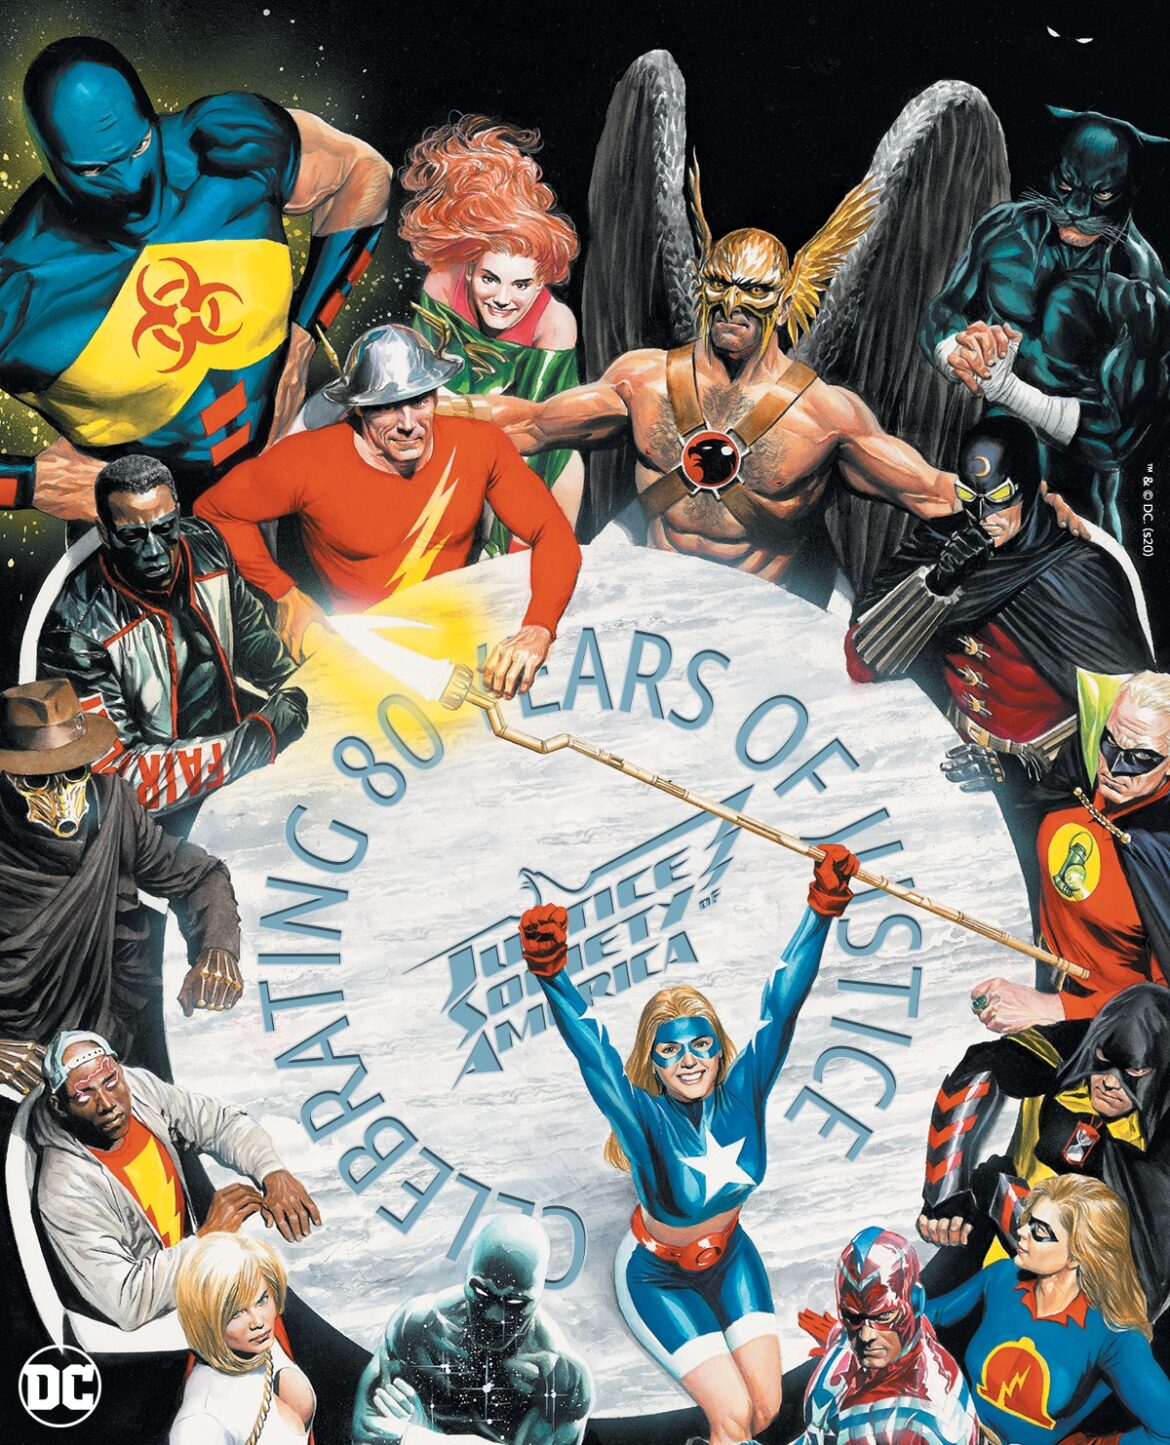 Justice Society of America Turns 80 Years Old